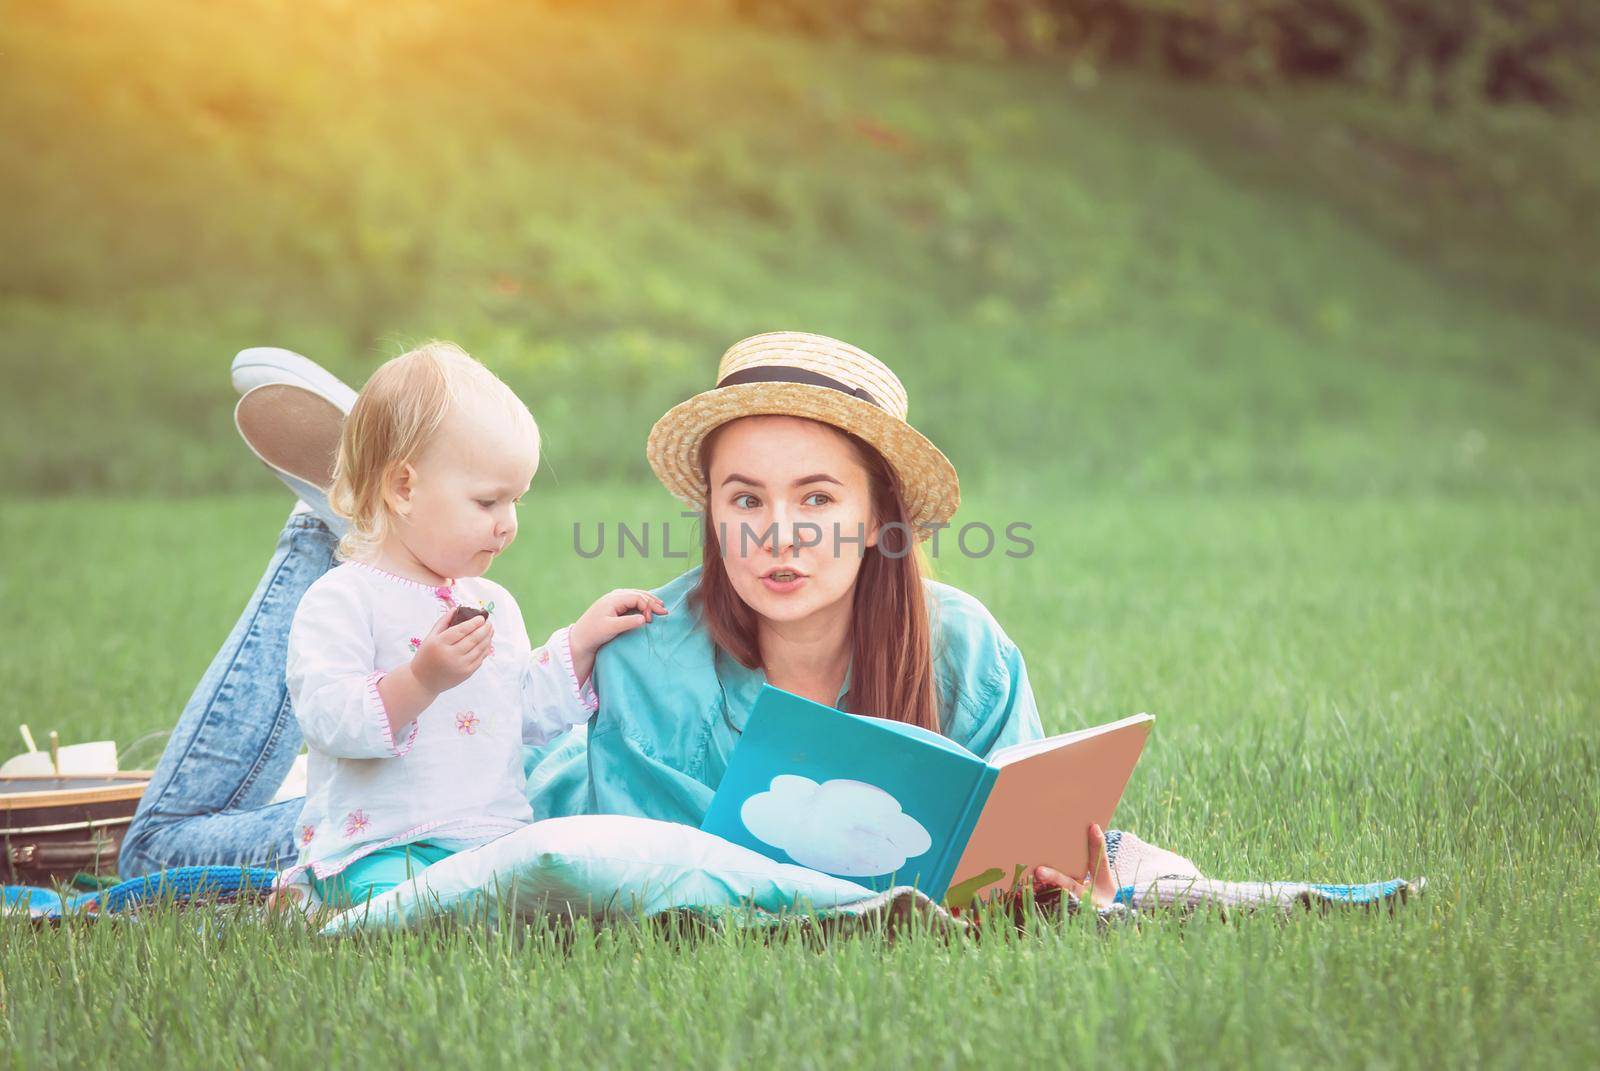 Mother is reading book for baby girl lying on the grass in the park. High quality photo